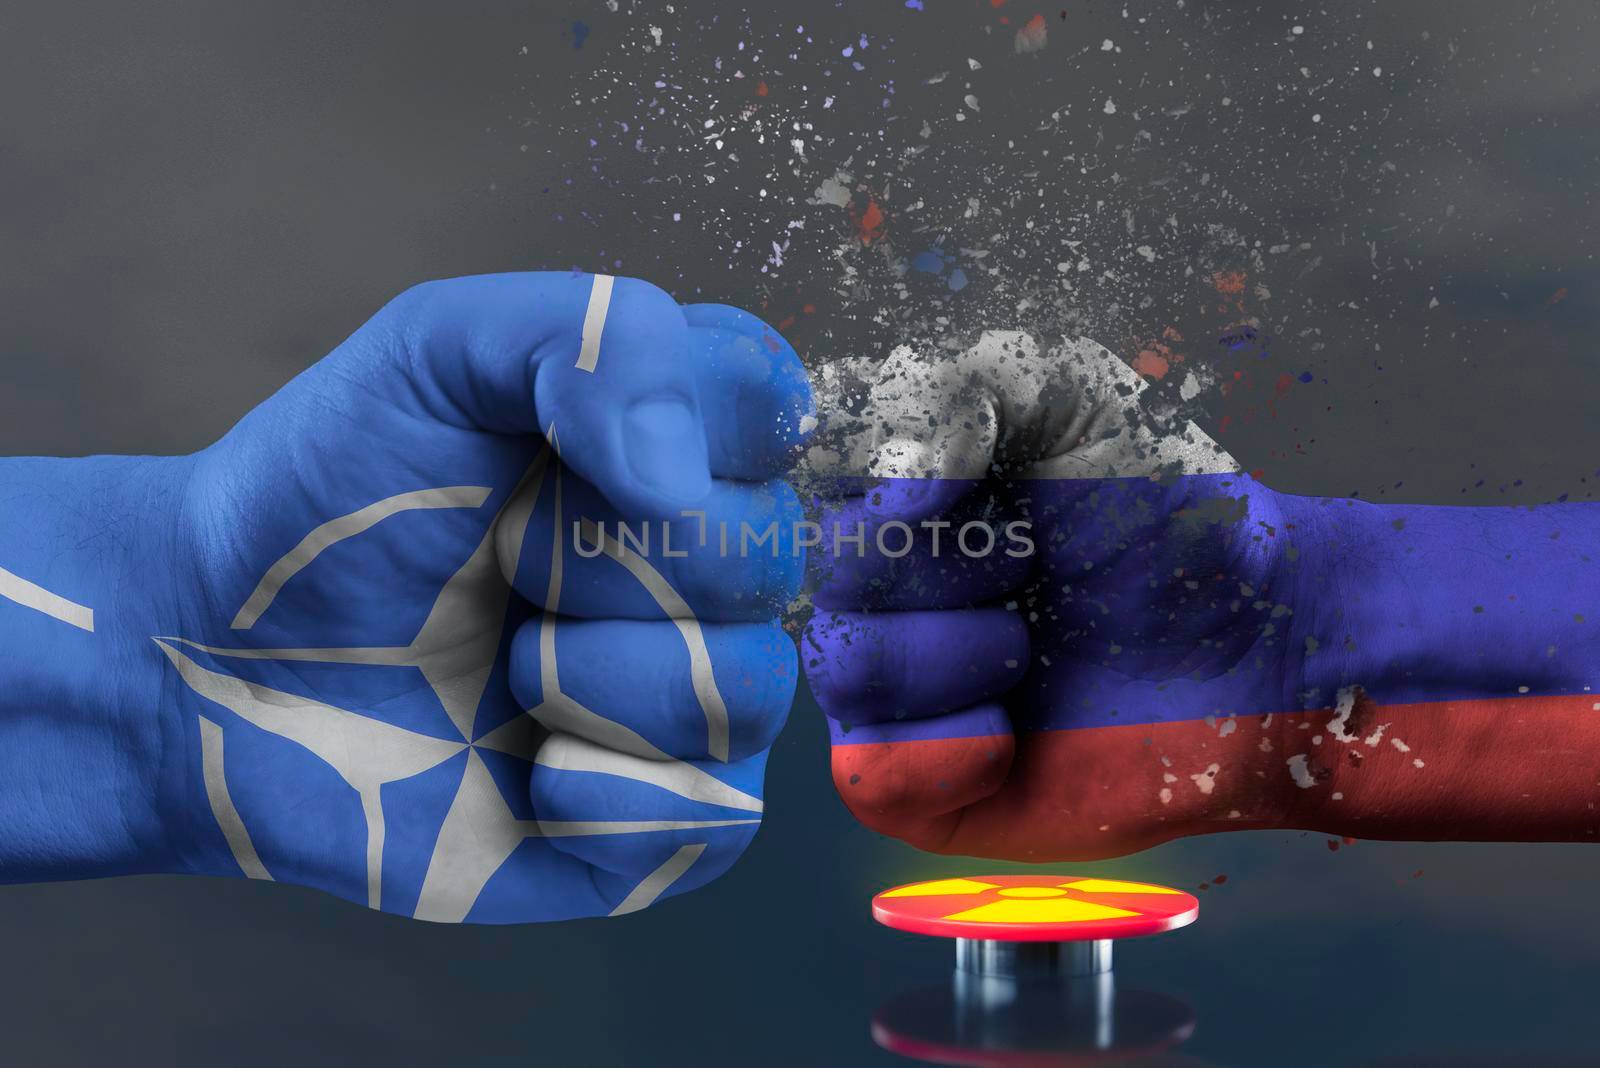 Confrontation NATO and Russia. Military conflict in Ukraine. The threat of nuclear war. NATO fist breaks a fist painted in the colors of the Russian flag. Red button with a symbol of nuclear weapons